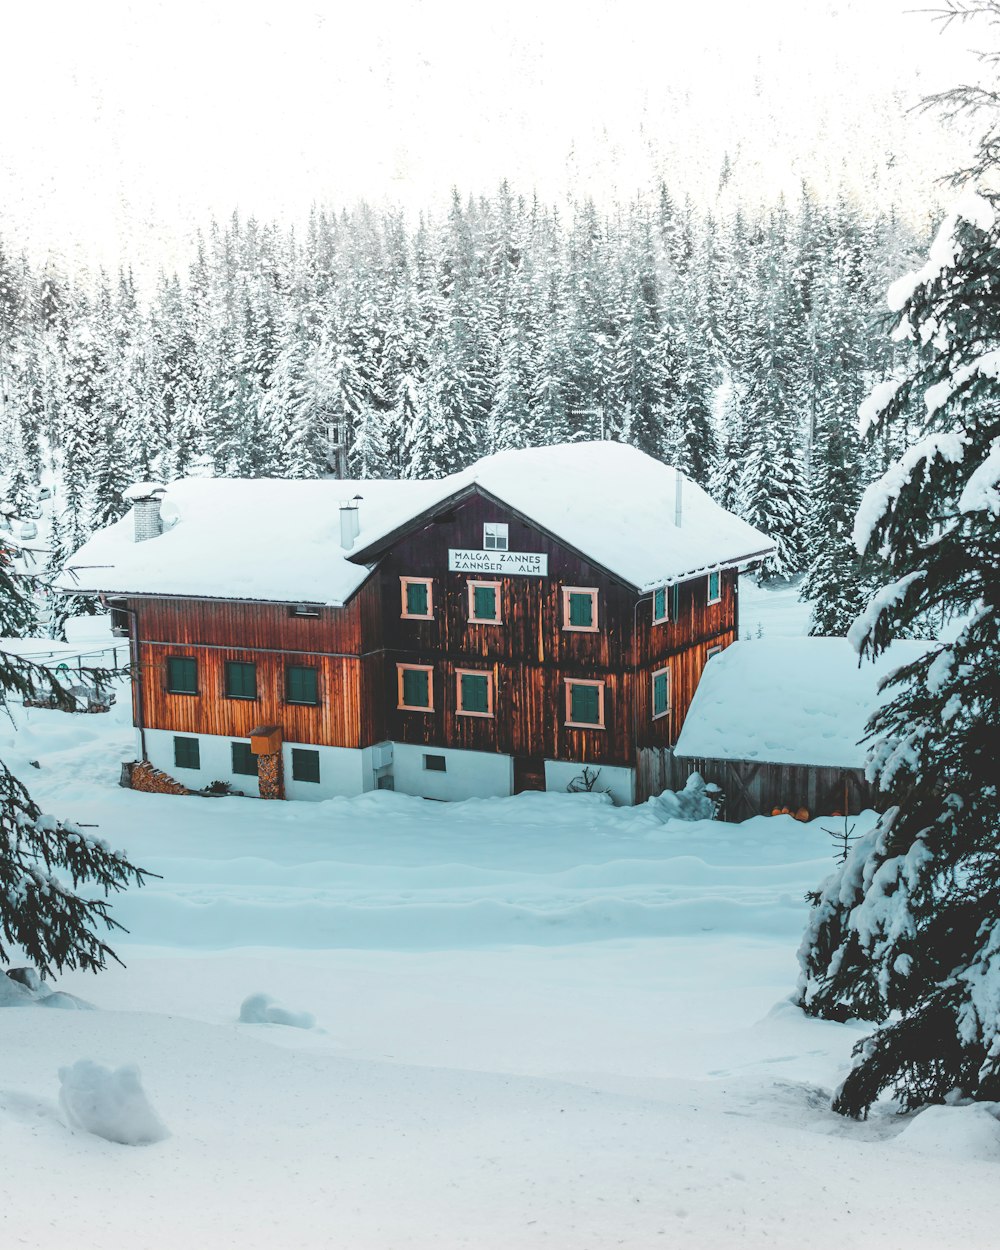 red and white wooden house on snow covered ground